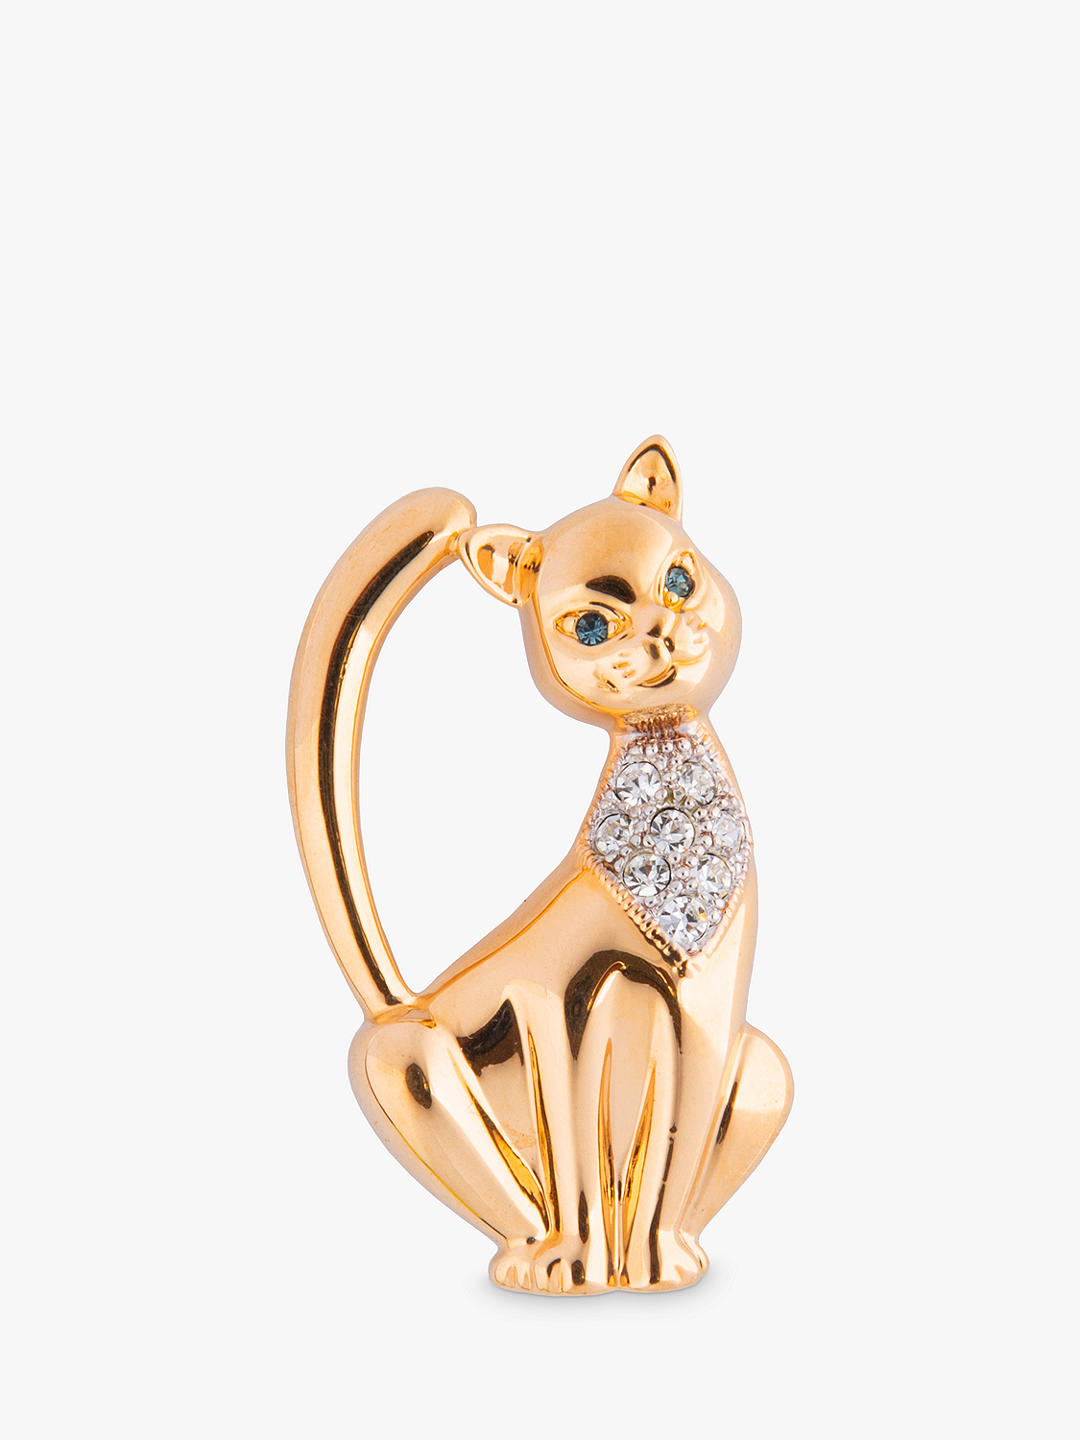 Eclectica Vintage Gold Plated Swarovski Crystal Cat Brooch, Dated Circa 1990s, Gold